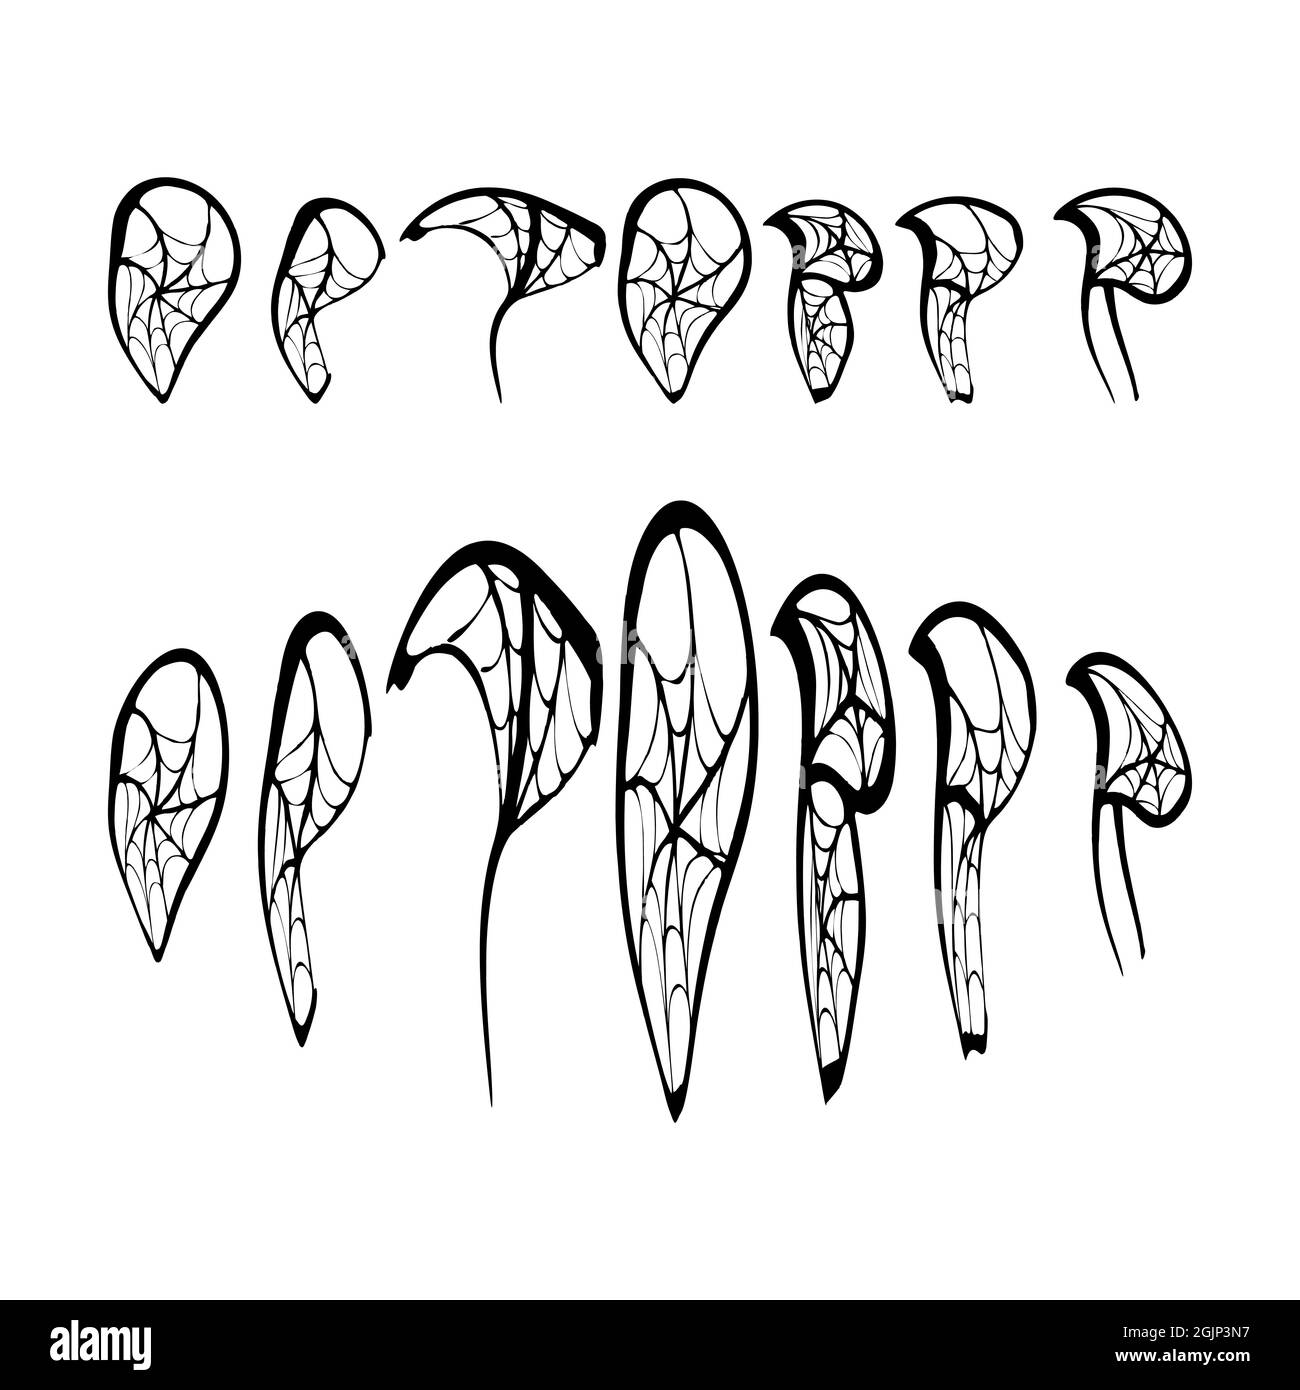 October horrible Halloween, lettering, hand-drawing letters, doodling, with spider webs. Black, on a white background, in isolation. Vector illustration Stock Vector